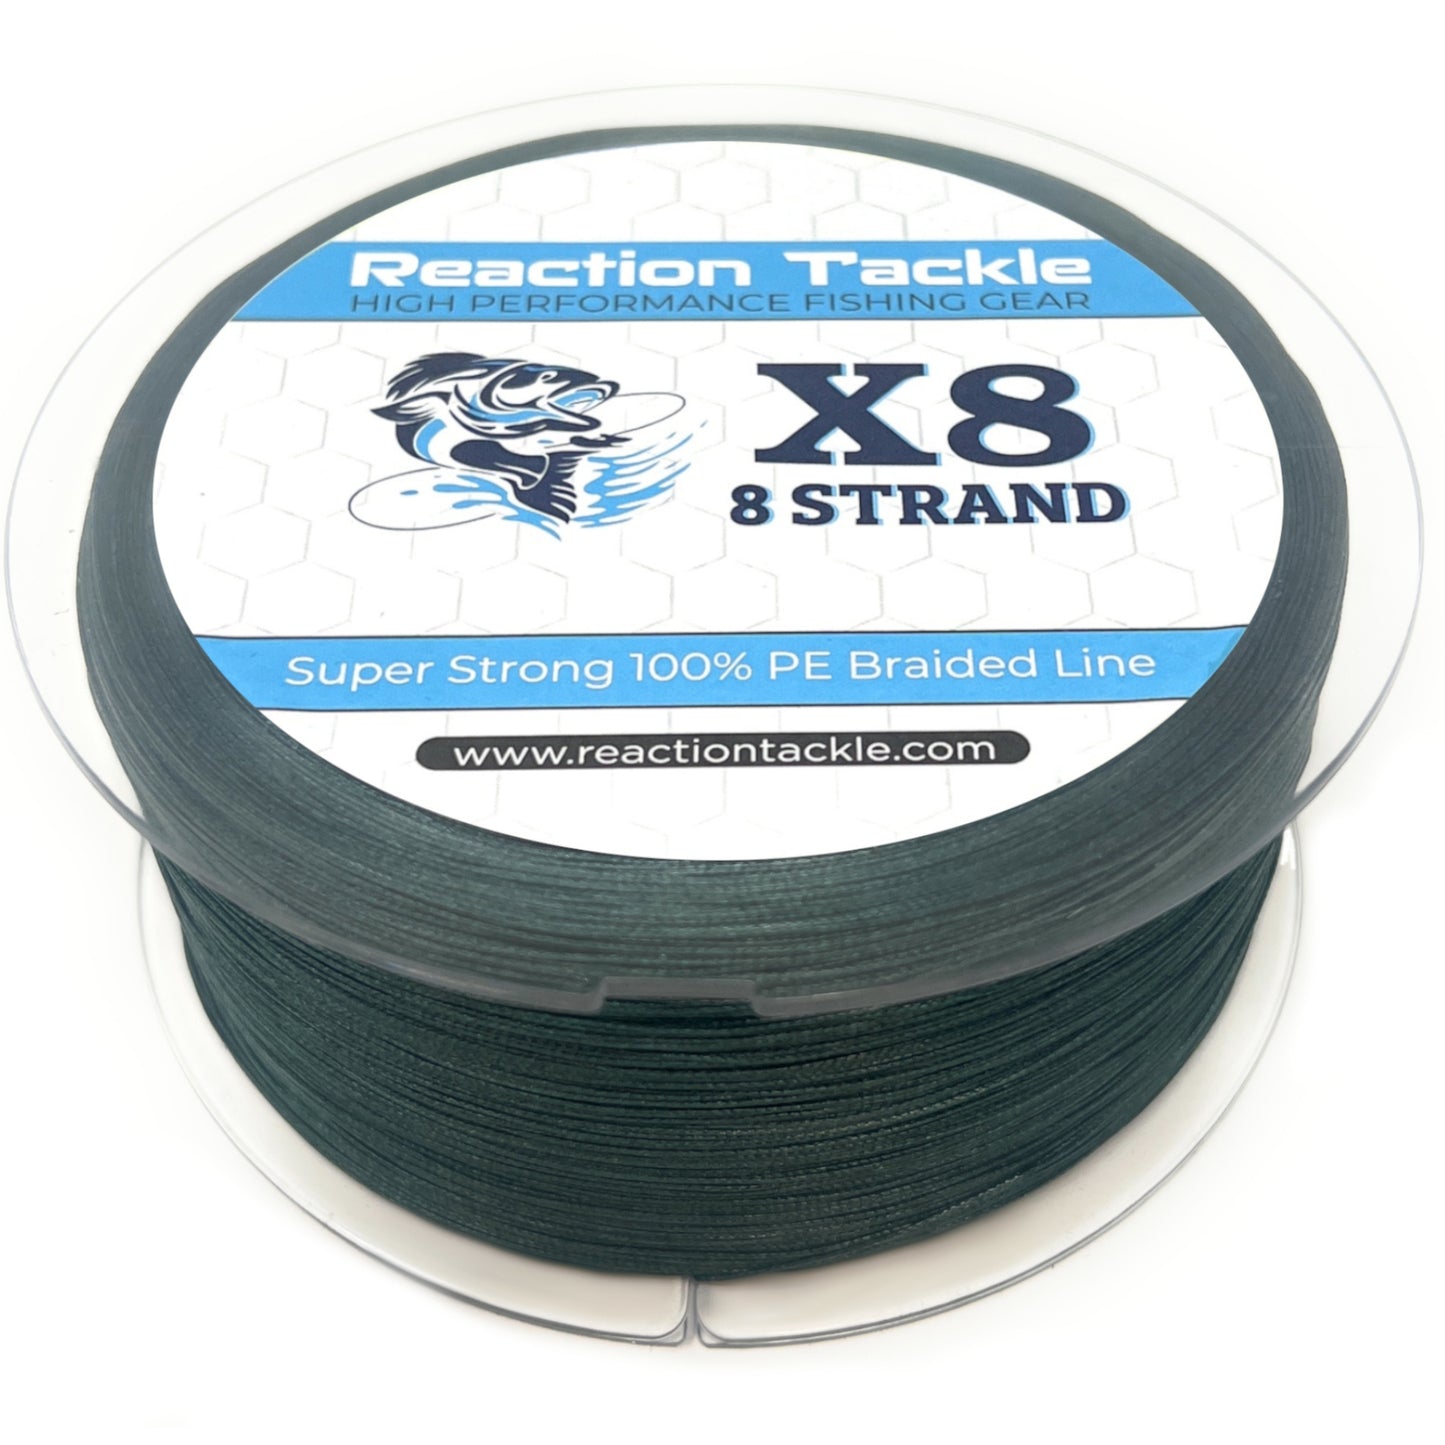 Reaction Tackle Braided Fishing Line - 8 Strand Moss Green 30LB